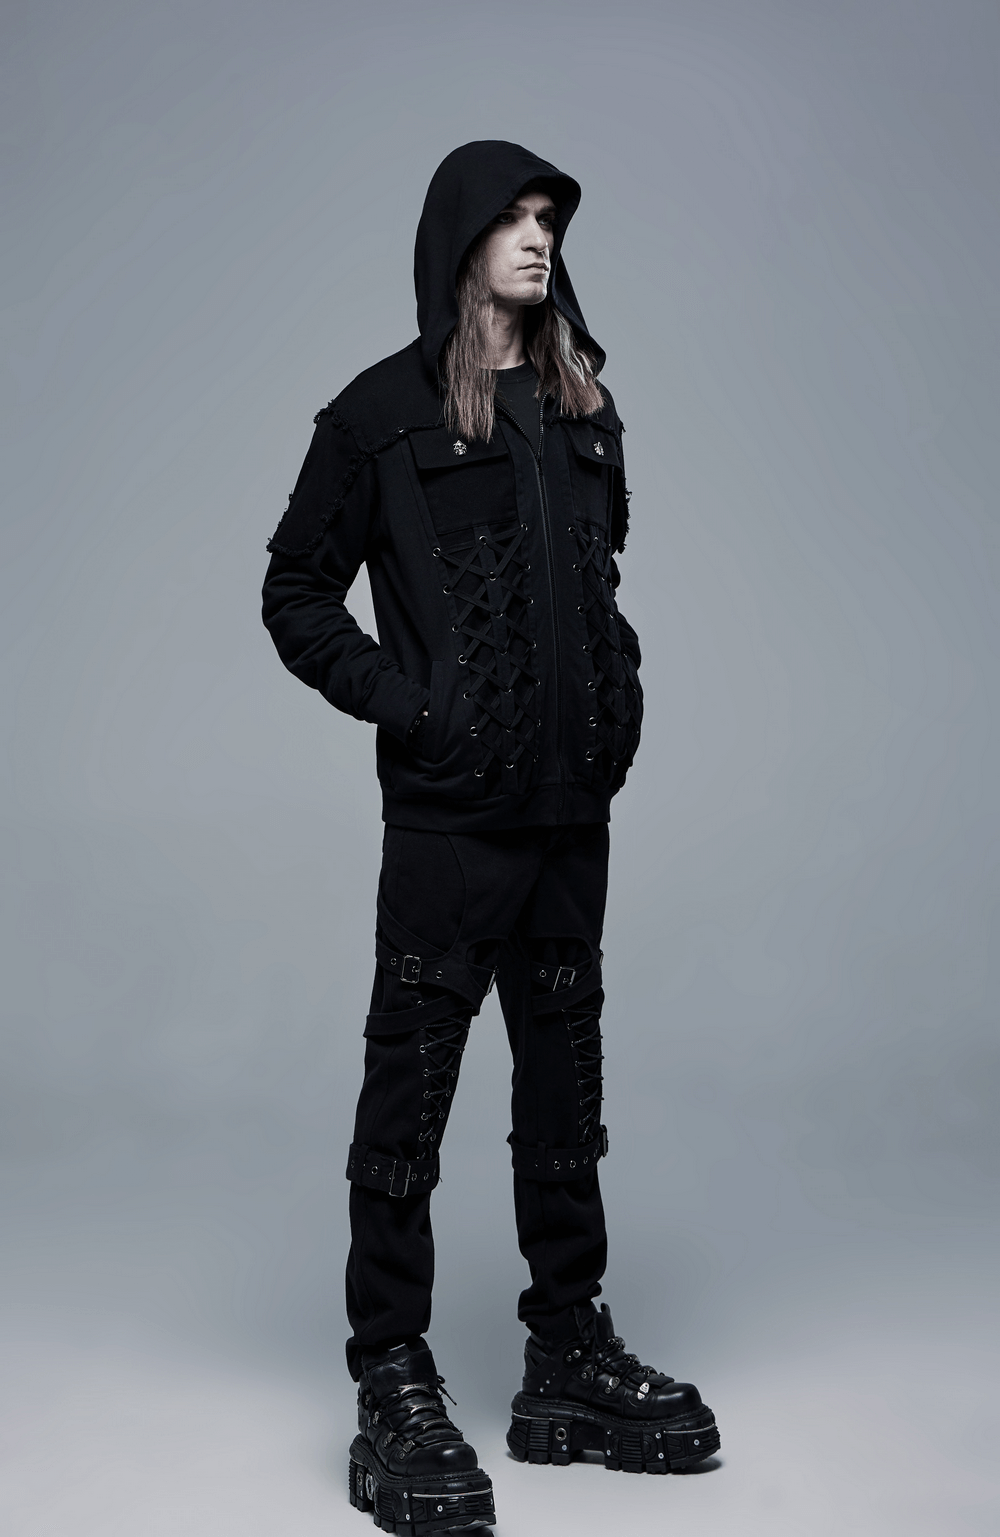 Stylish Men's Gothic Jacket with Lace-Up Front And Hood - HARD'N'HEAVY